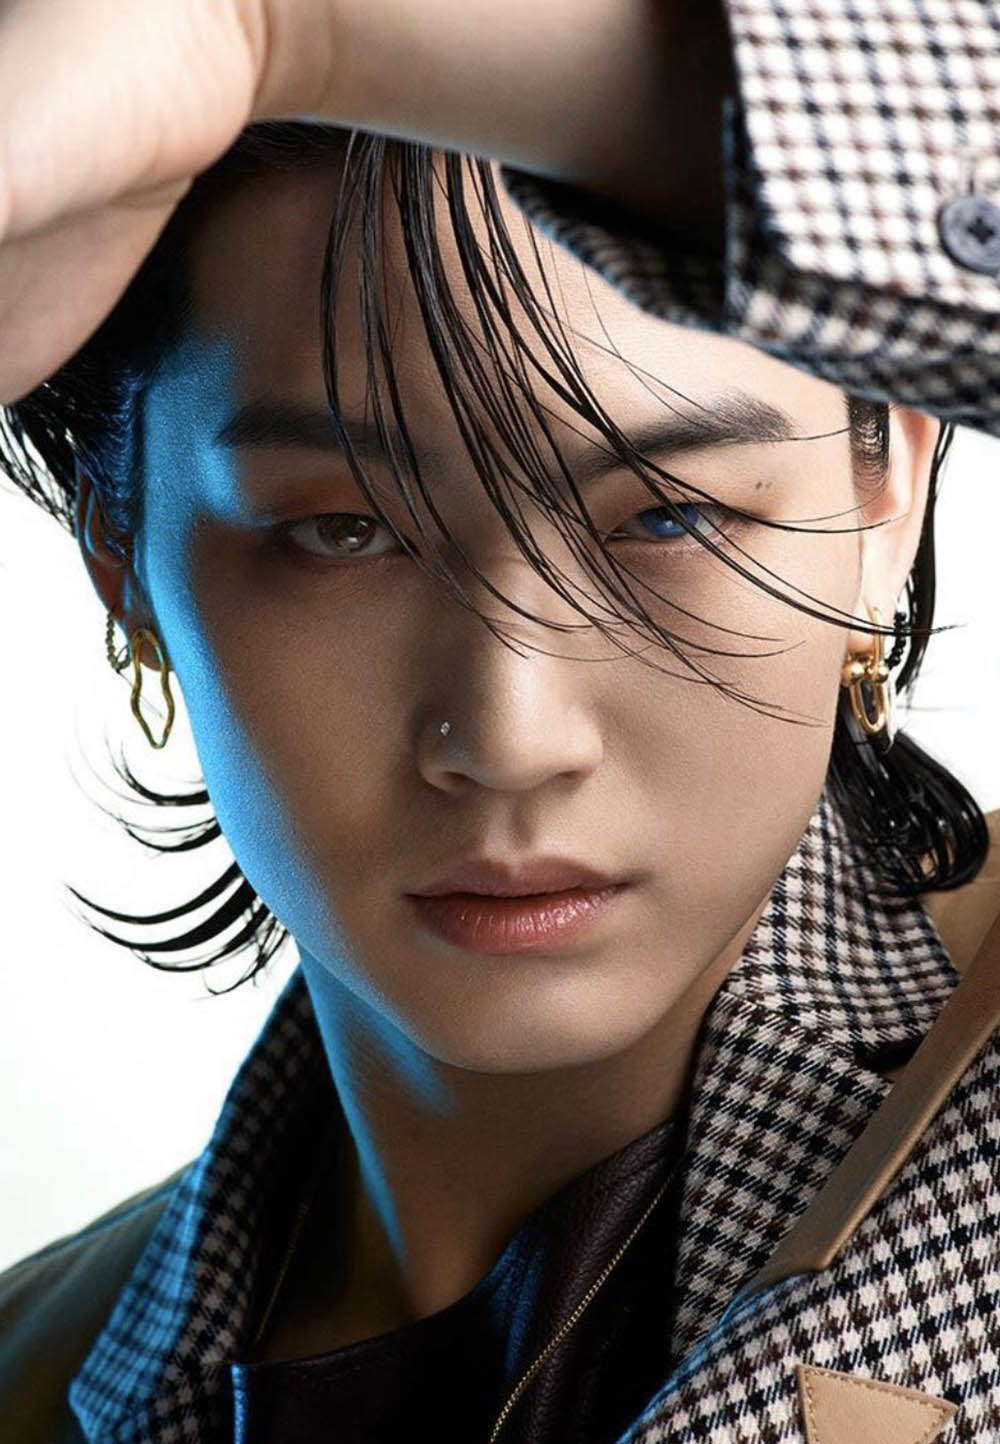 GOT7’s JB covers Allure May 2020 Digital Edition by Ahn Jooyoung